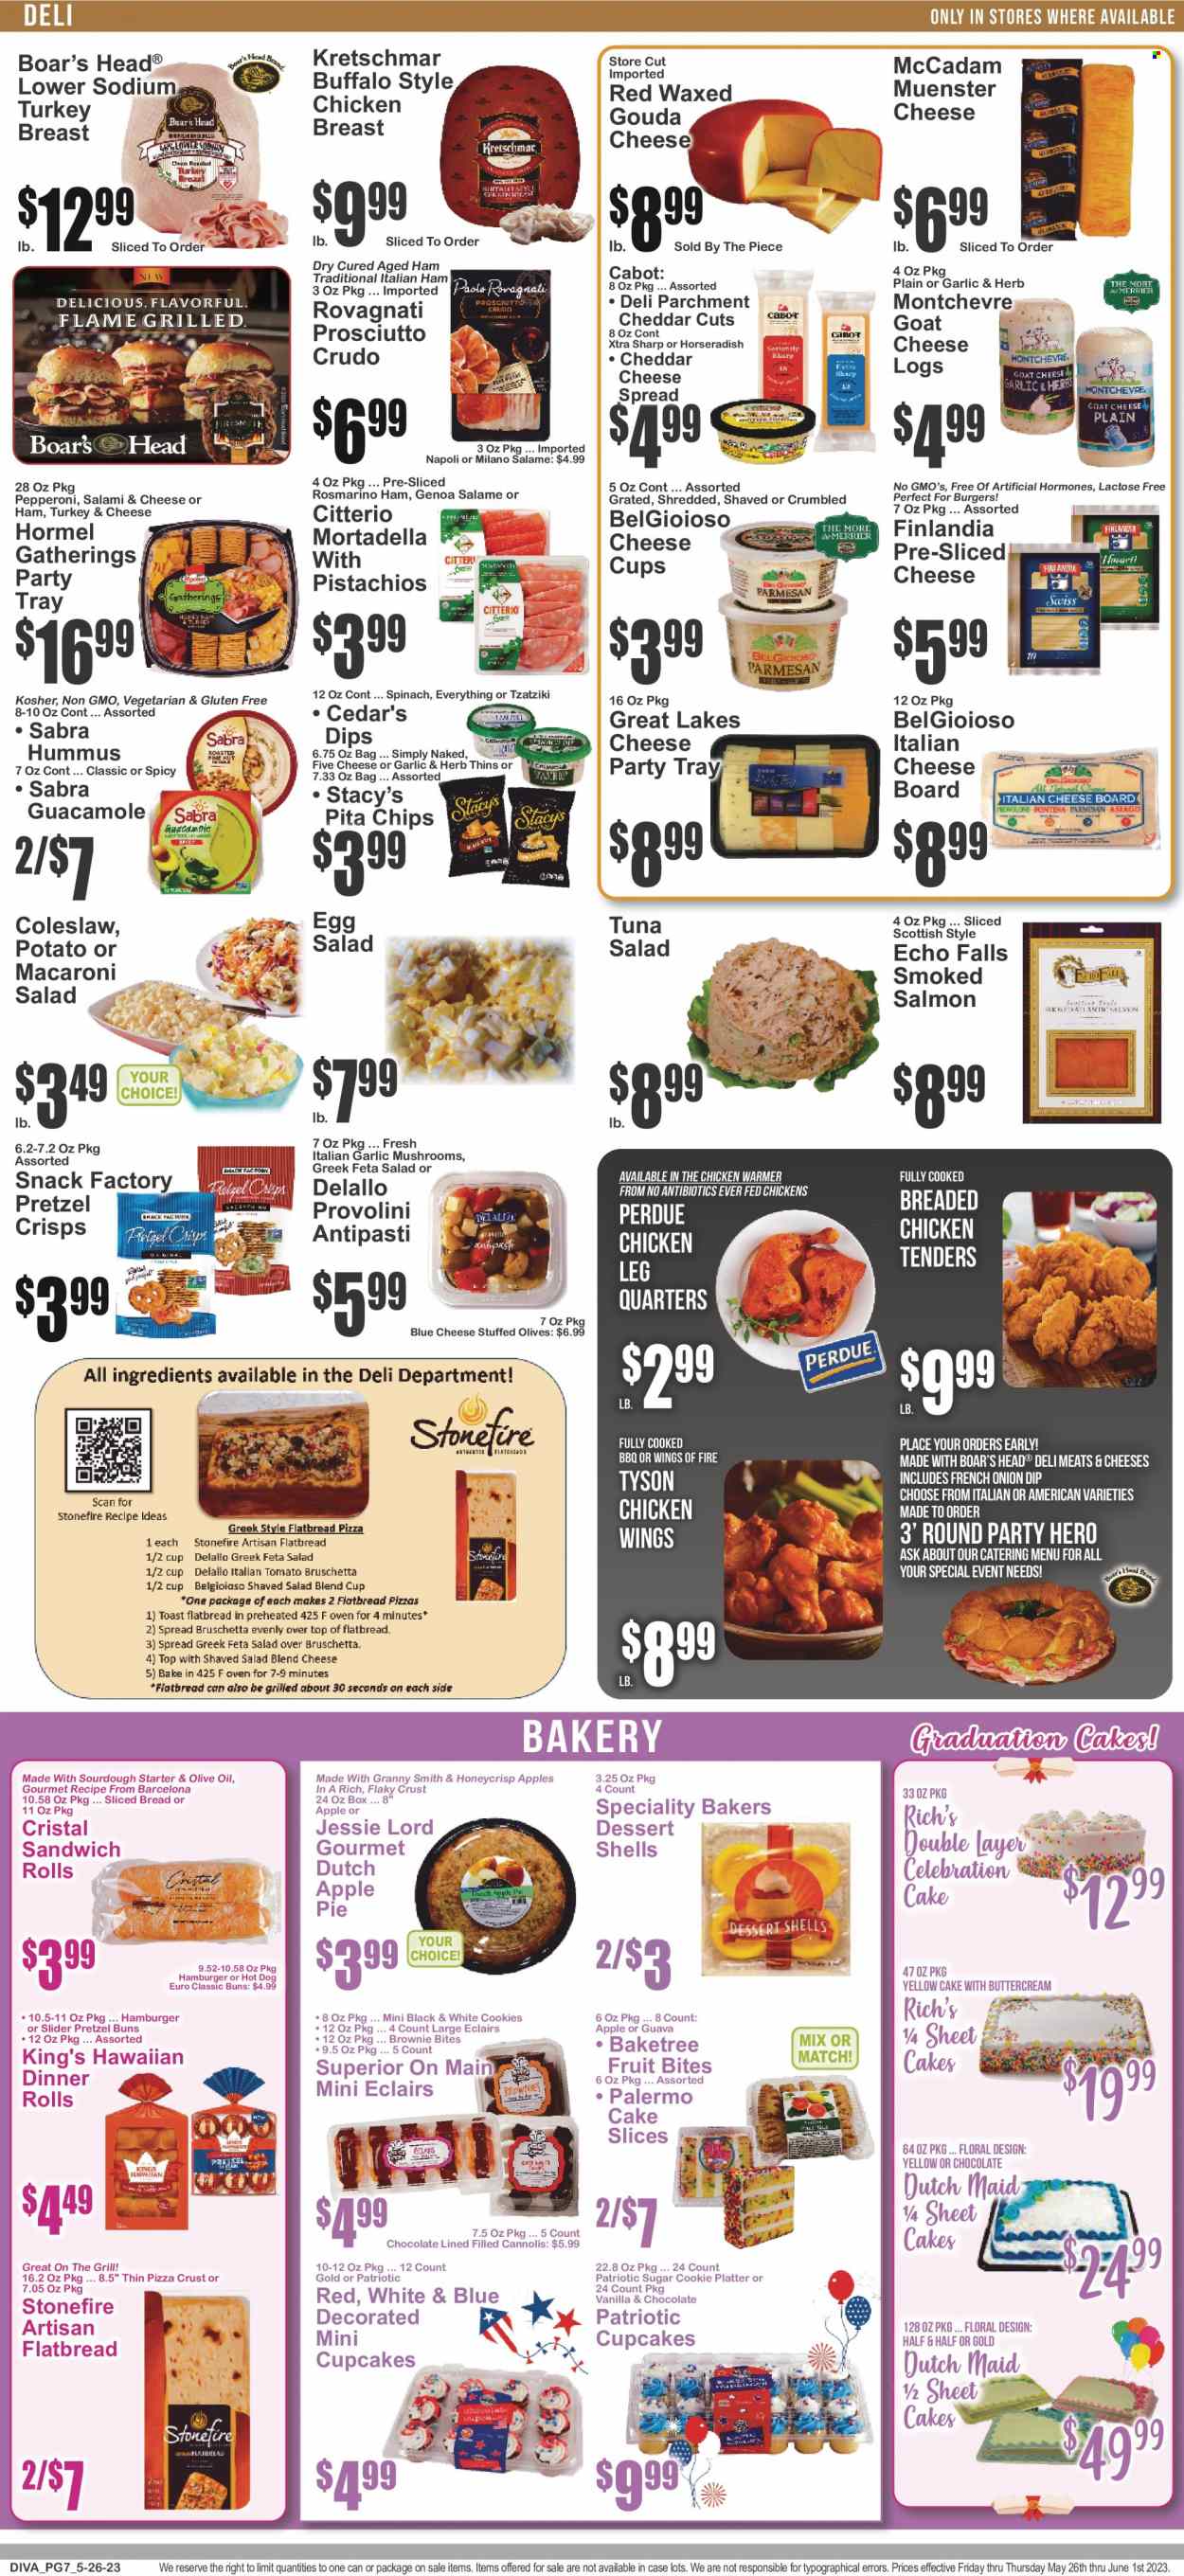 thumbnail - Key Food Flyer - 05/26/2023 - 06/01/2023 - Sales products - mushrooms, bread, cake, dinner rolls, flatbread, sandwich rolls, apple pie, cupcake, brownies, dessert shells, dessert, horseradish, guava, Granny Smith, salmon, smoked salmon, tuna, coleslaw, hot dog, pizza, hamburger, fried chicken, Perdue®, Hormel, Boar's Head, ready meal, mortadella, salami, prosciutto, snack, tzatziki, hummus, cheese spread, guacamole, macaroni salad, tuna salad, antipasti, blue cheese, gouda, sliced cheese, cheese cup, Münster cheese, feta, Montchevre, chicken wings, cookies, Celebration, chips, Thins, pretzel crisps, pita chips, sourdough starter, sugar, olives, olive oil, oil, chicken breasts, chicken legs, turkey, XTRA, cup, cheese board, platters, Bakers, Half and half. Page 8.